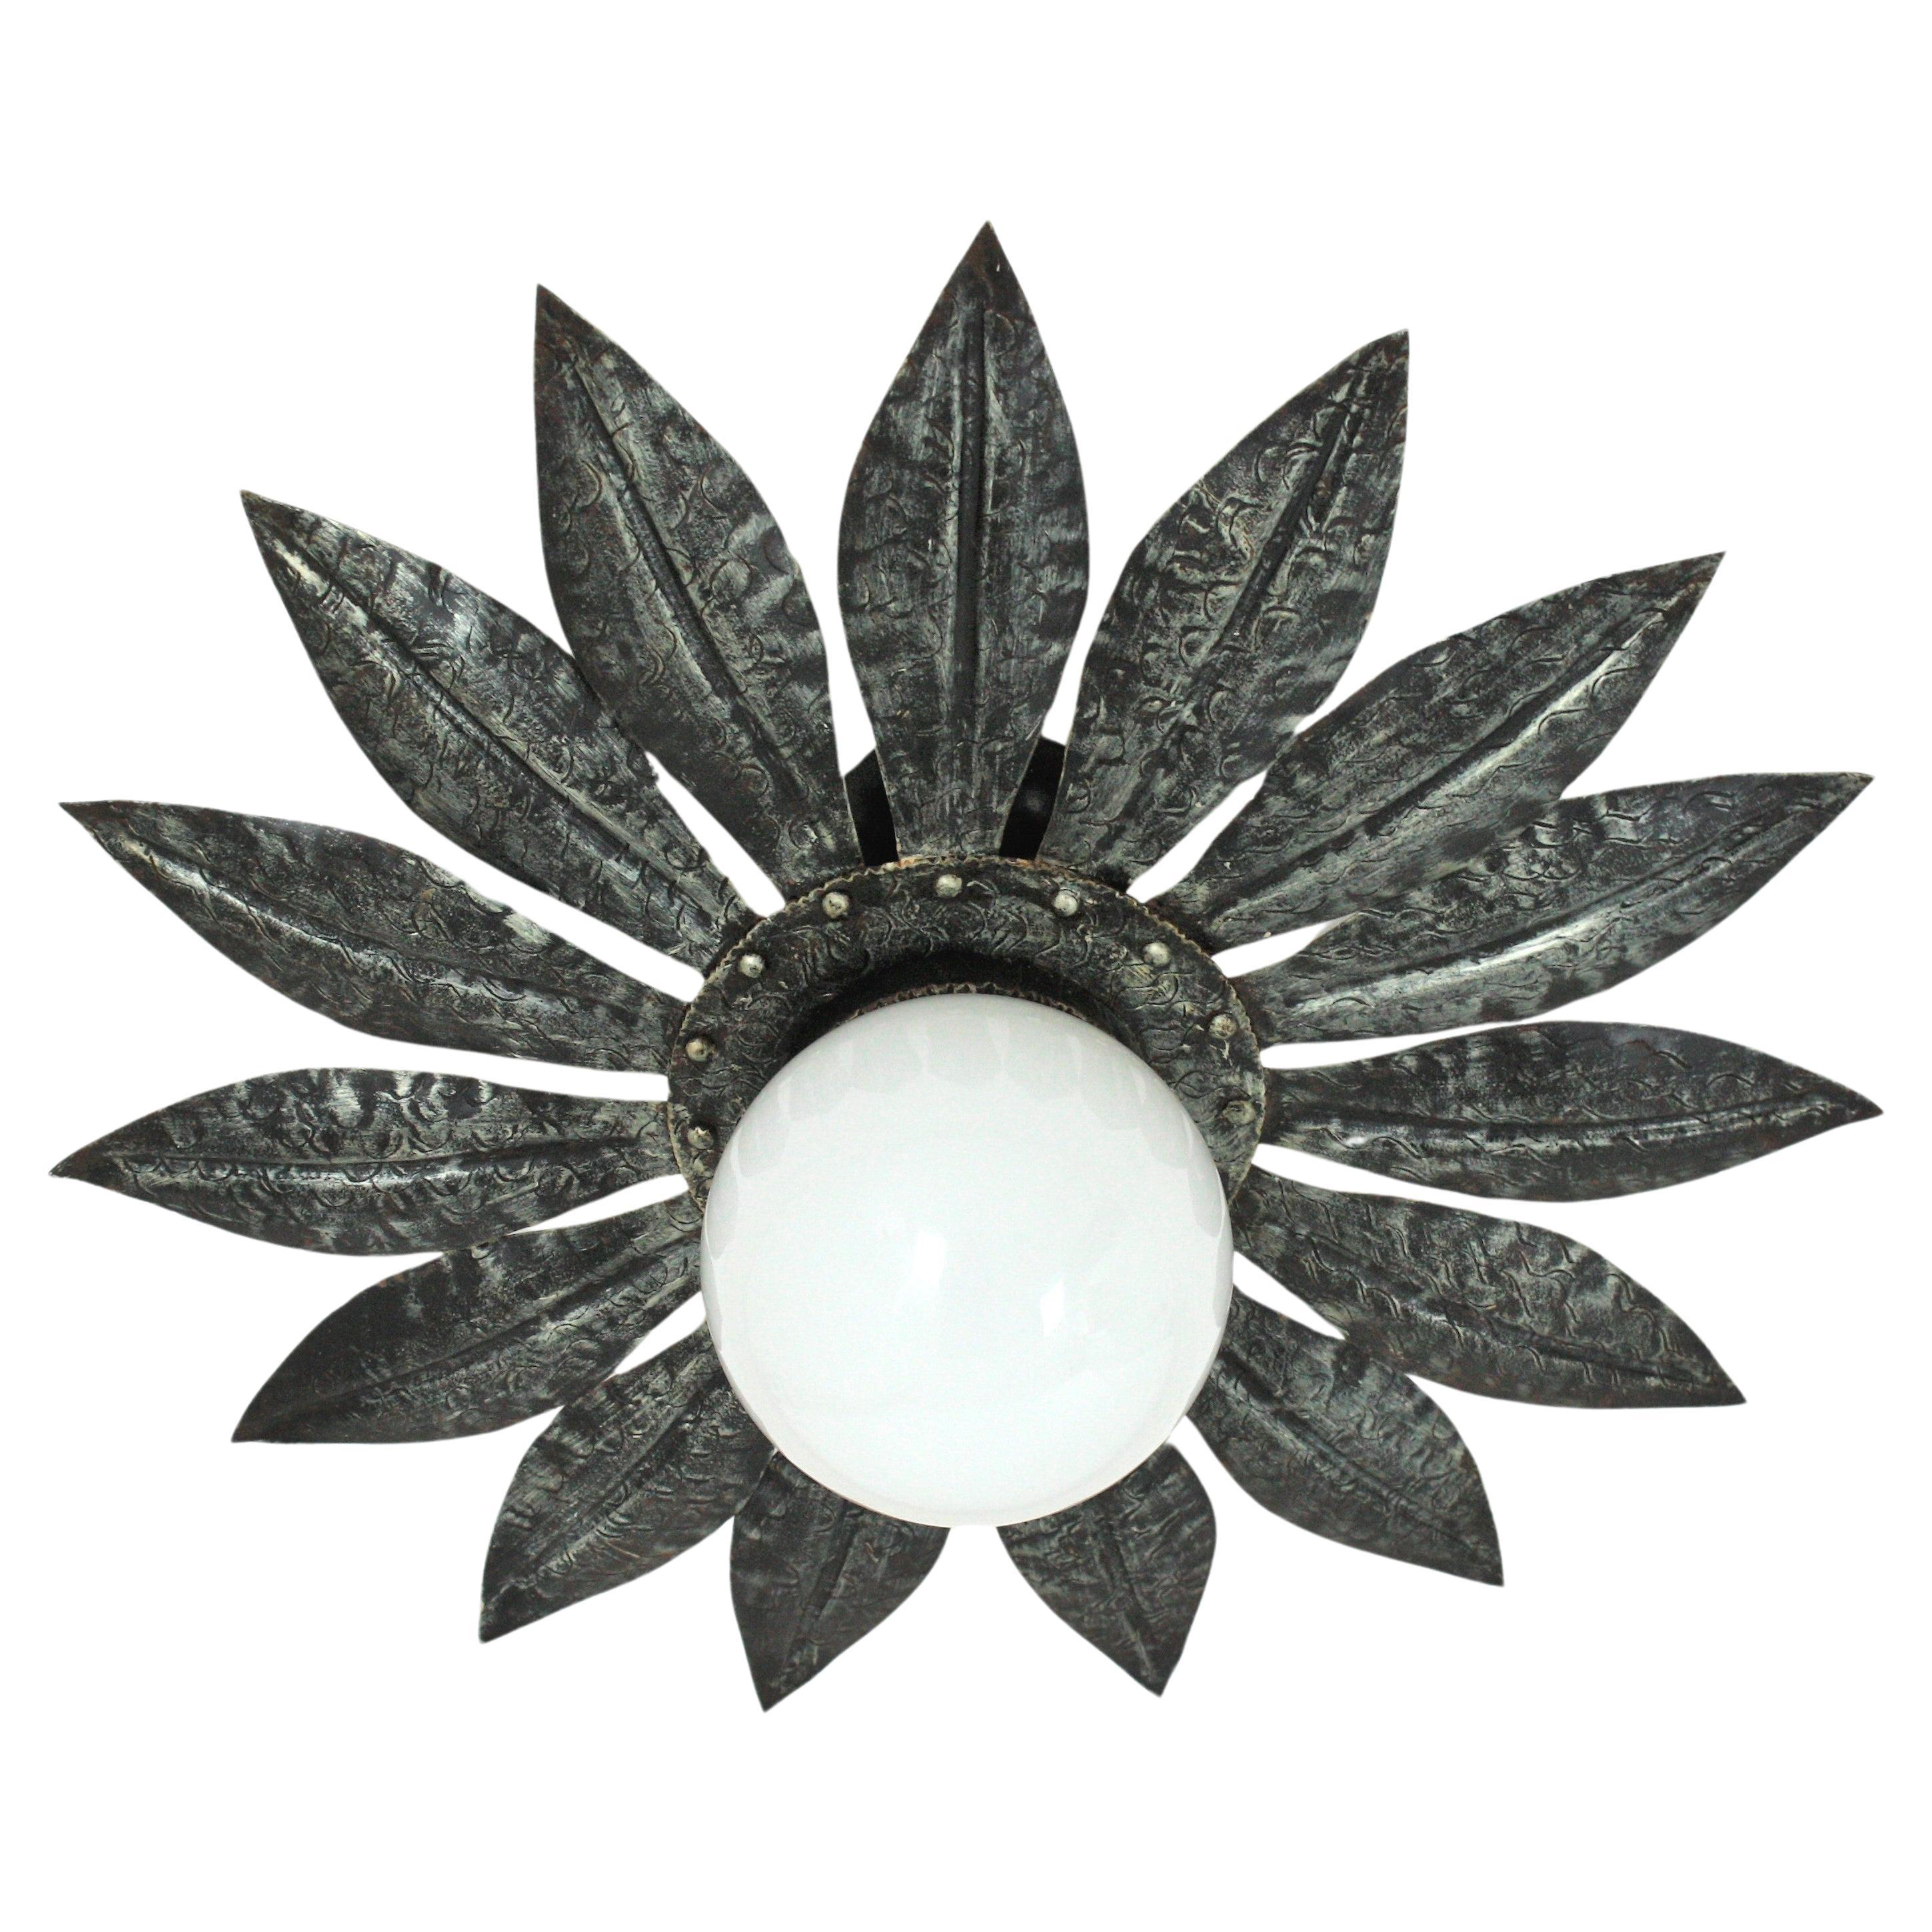 Flower Sunburst Silvered Ceiling Light Fixture
Eye-catching Midcentury flower or sunburst ceiling lamp, silvered metal, milk glass. Spain, 1950s-1960s.
This flush mount features a flower burst or sunburst in silver color with leaves surrounding a